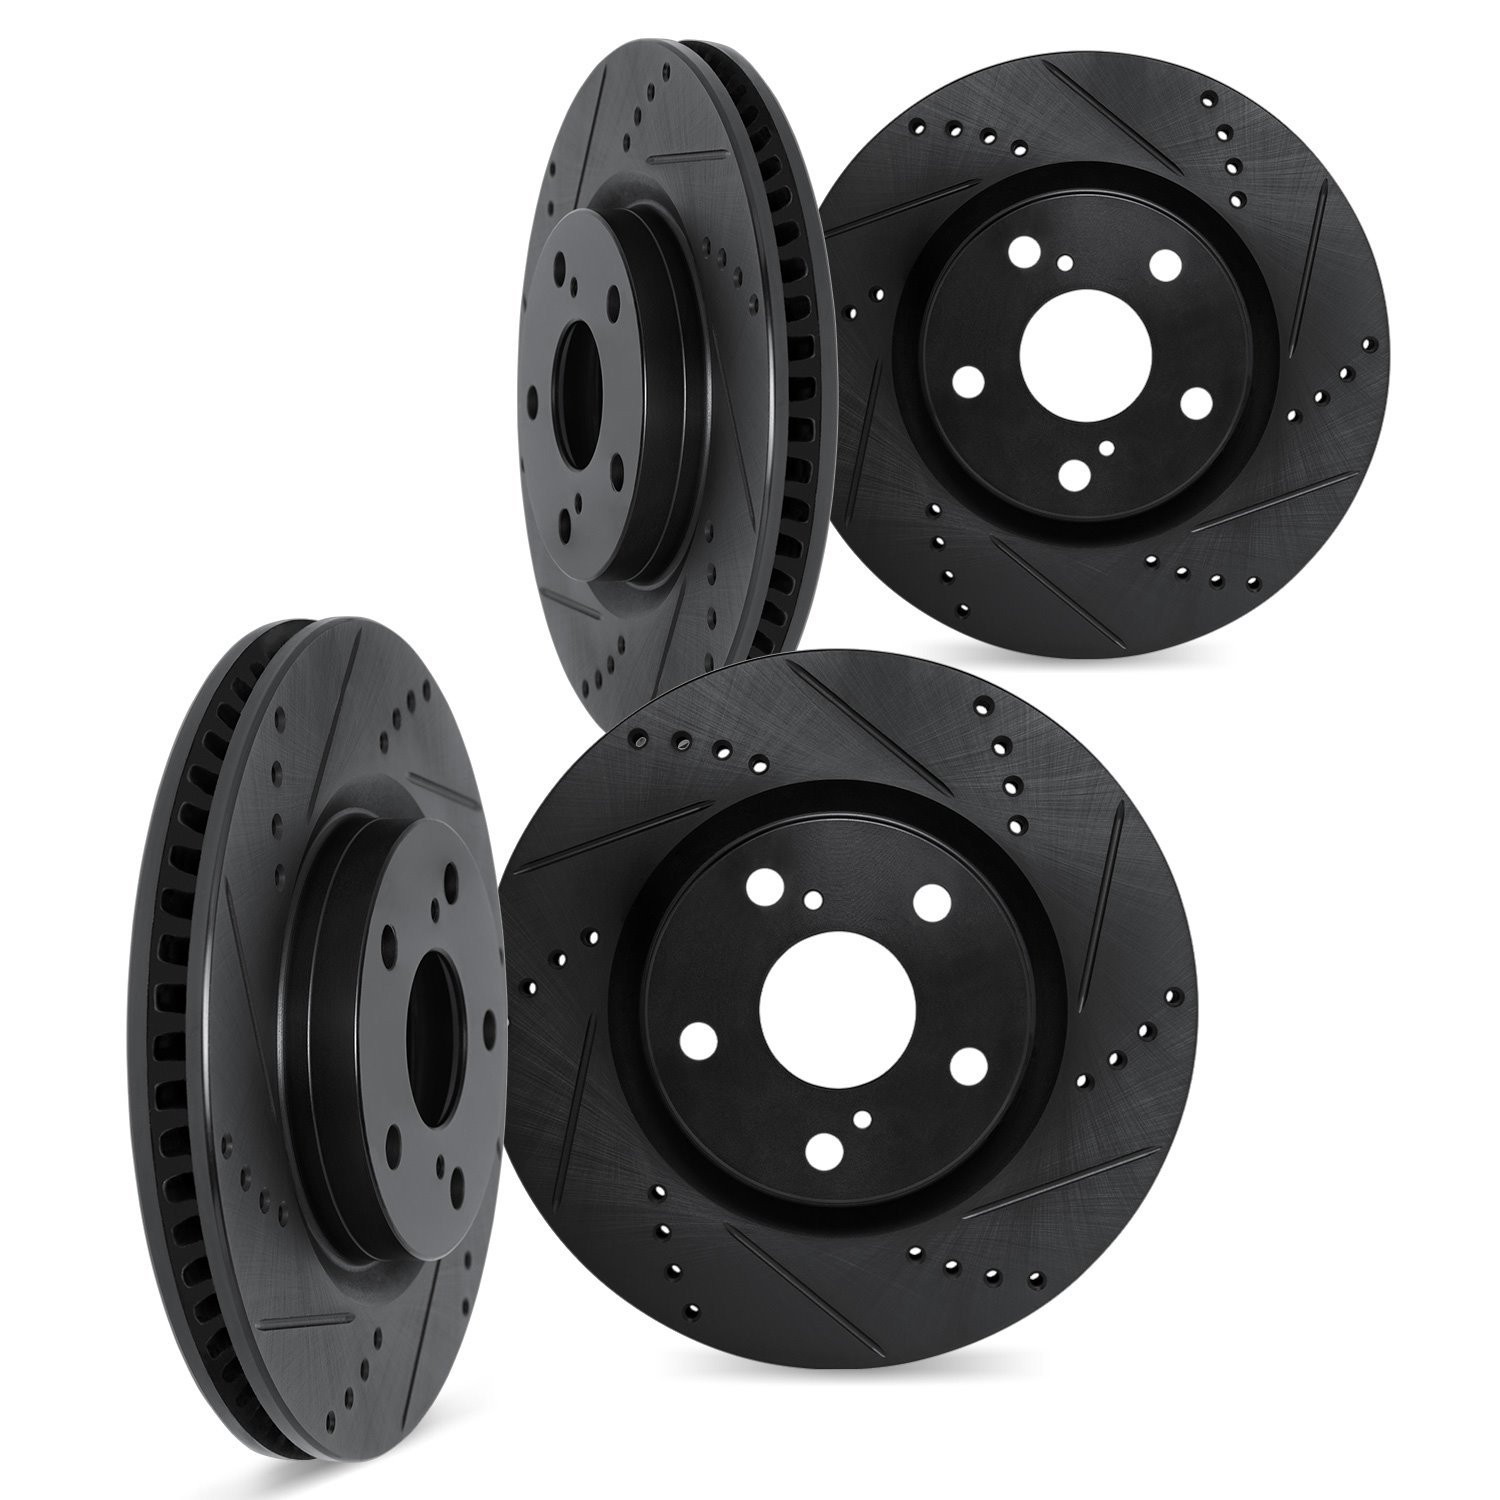 8004-67043 Drilled/Slotted Brake Rotors [Black], 1989-1990 Infiniti/Nissan, Position: Front and Rear